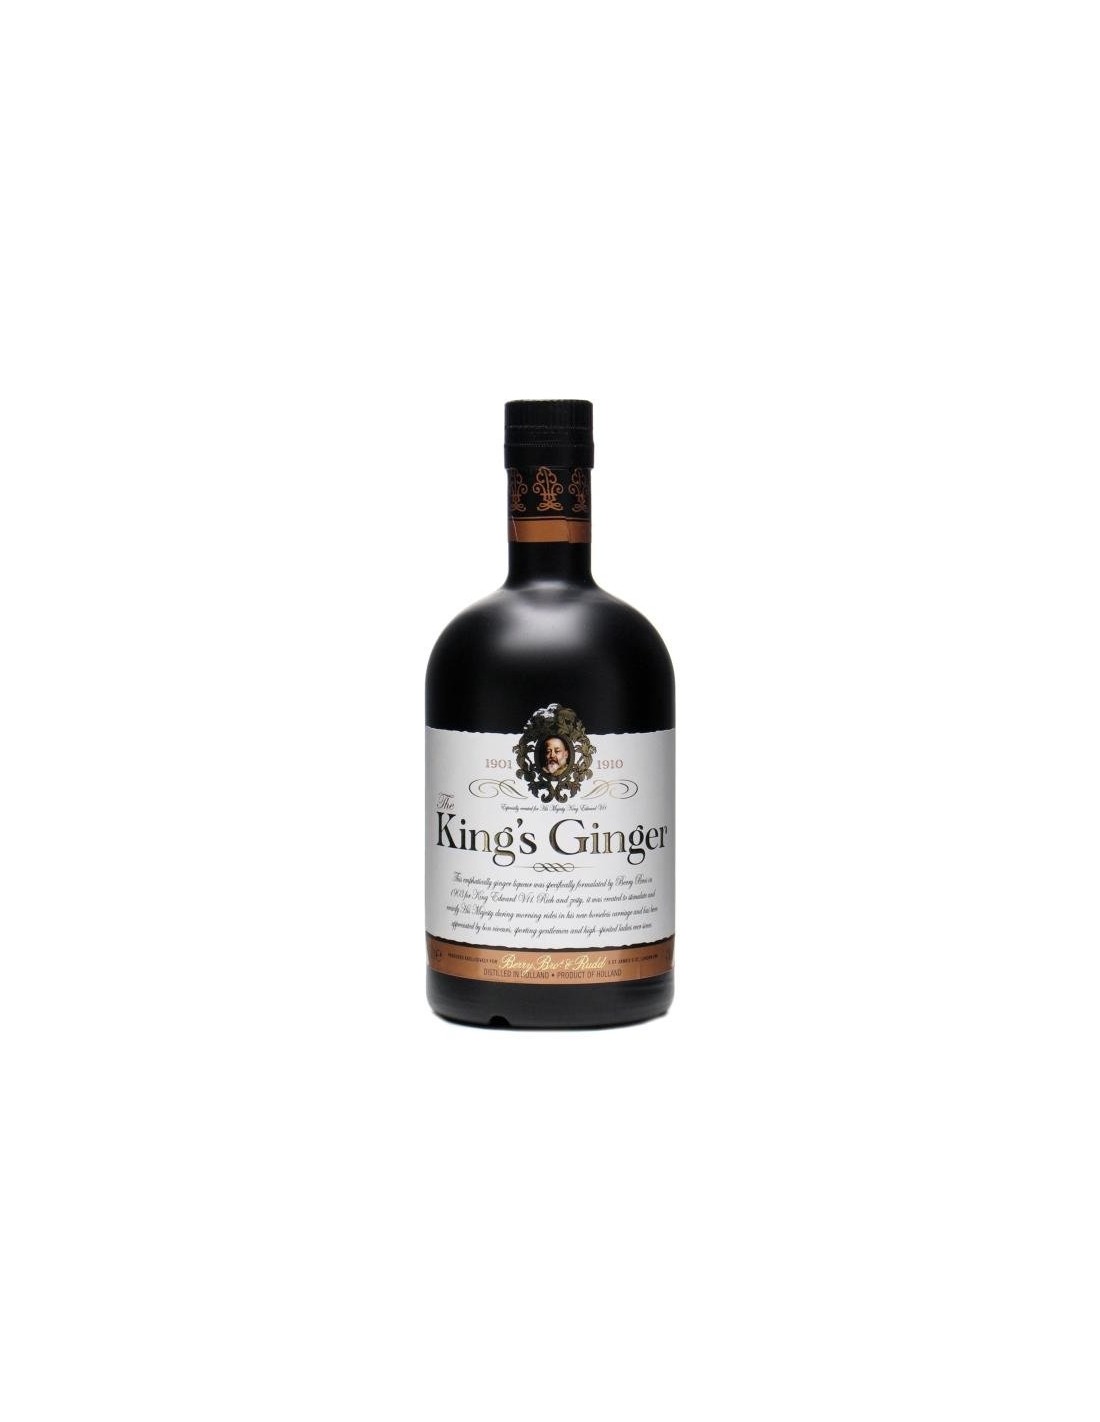 Lichior King’s Ginger 41% alc., 0.5L alcooldiscount.ro